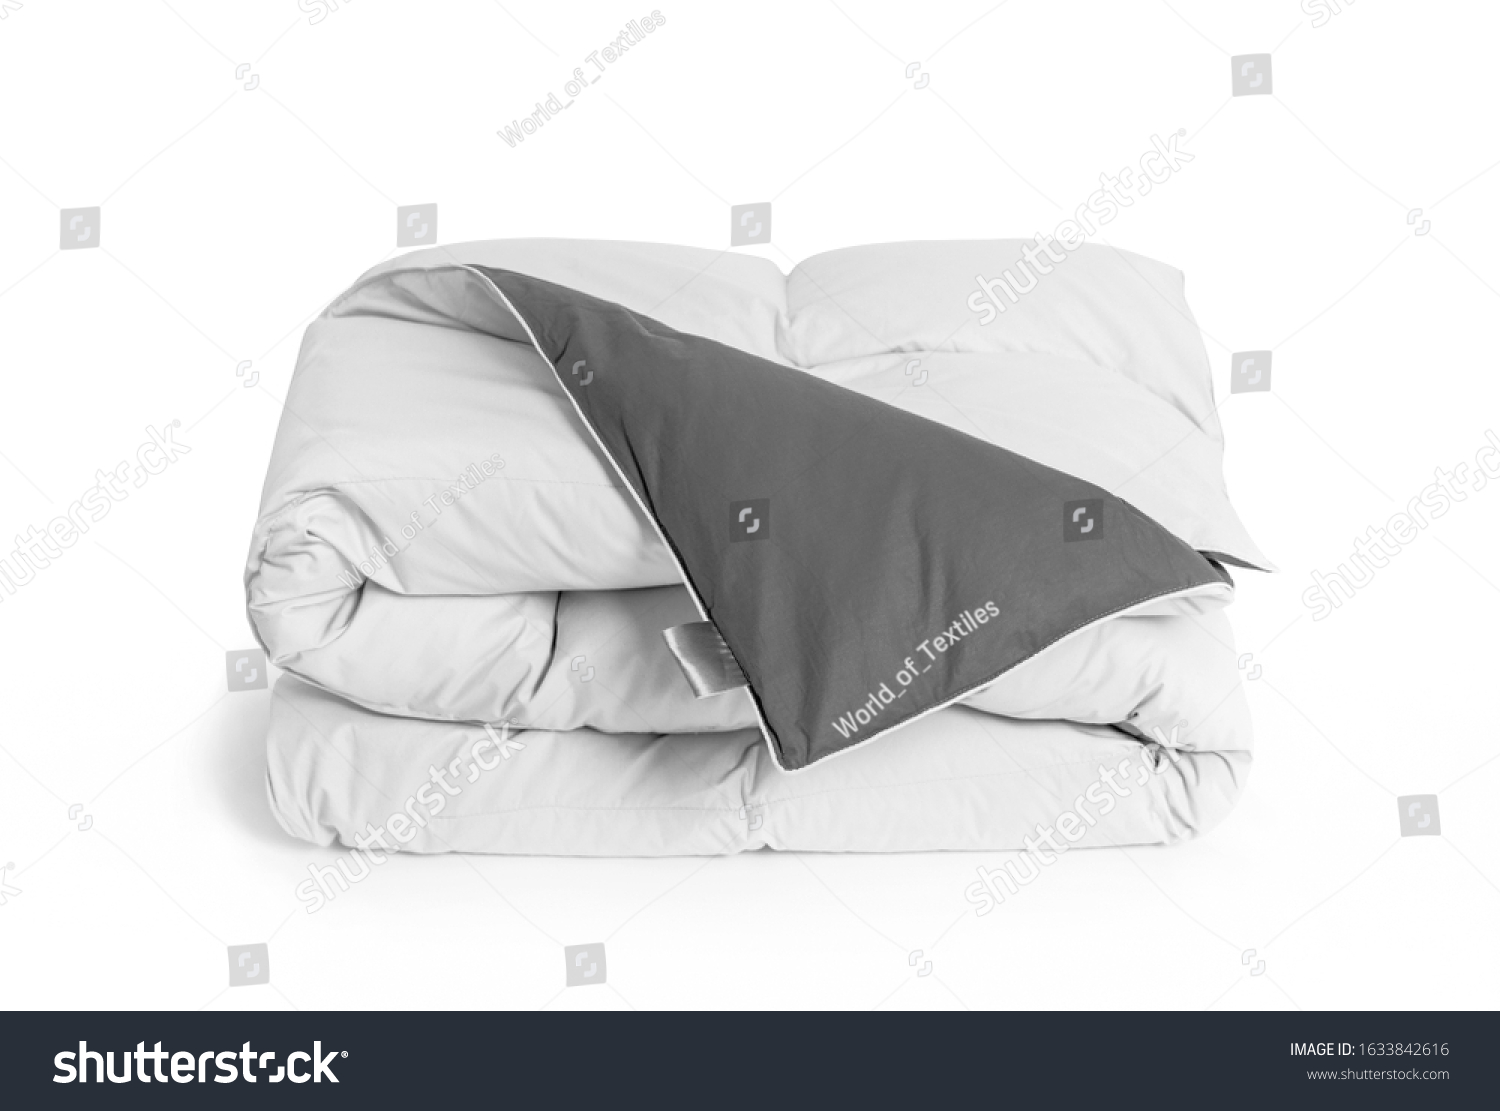 Folded soft white duvet, blanket or bedspread with the gray back side and empty white label, against white background. Close up photo #1633842616